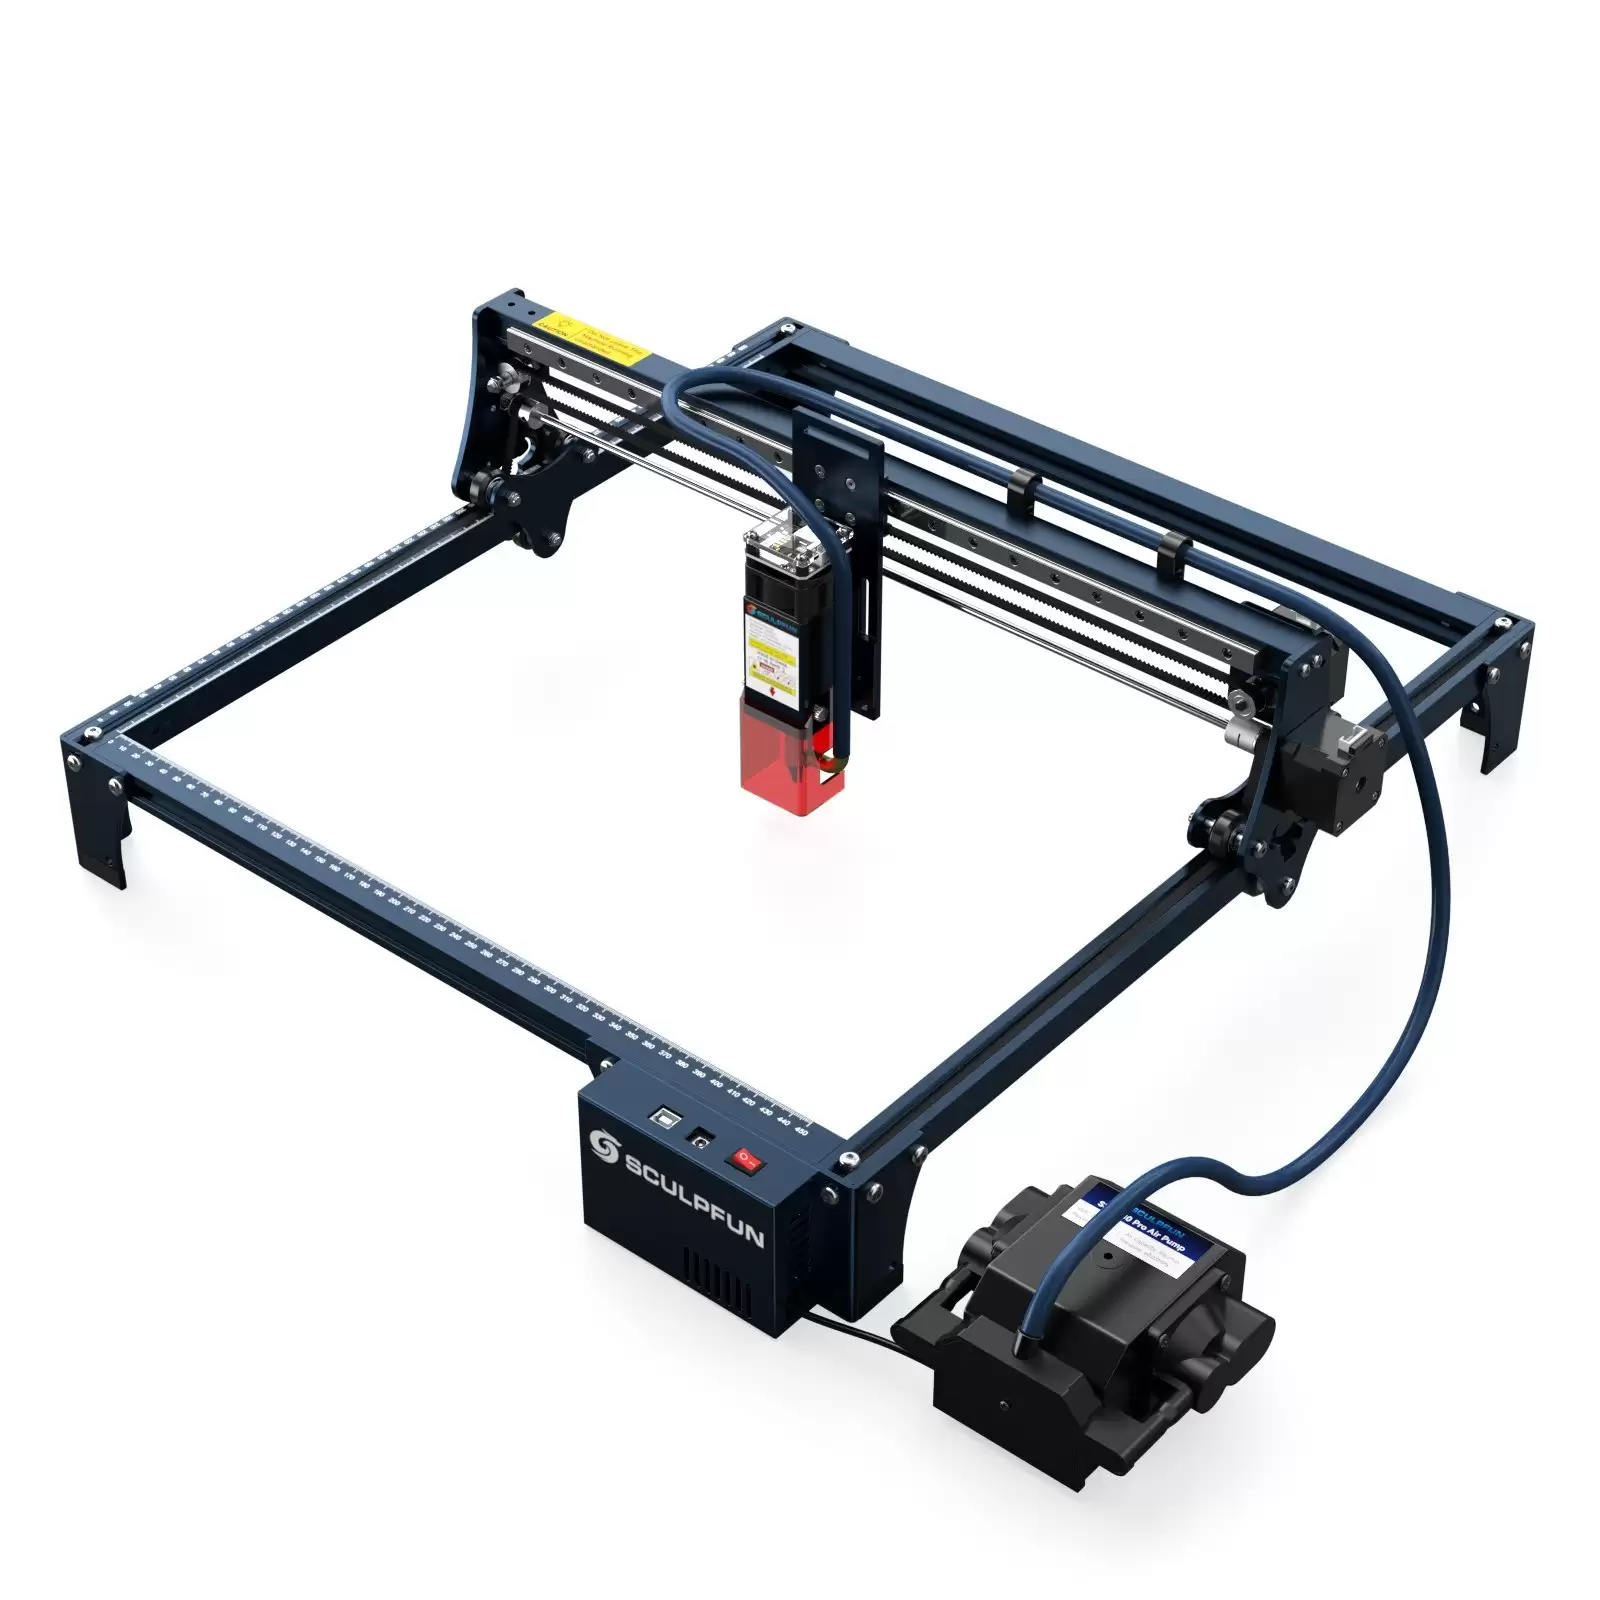 Order In Just $449 [Us Warehouse] Sculpfun S30 Pro 10w Laser Engraver At Tomtop